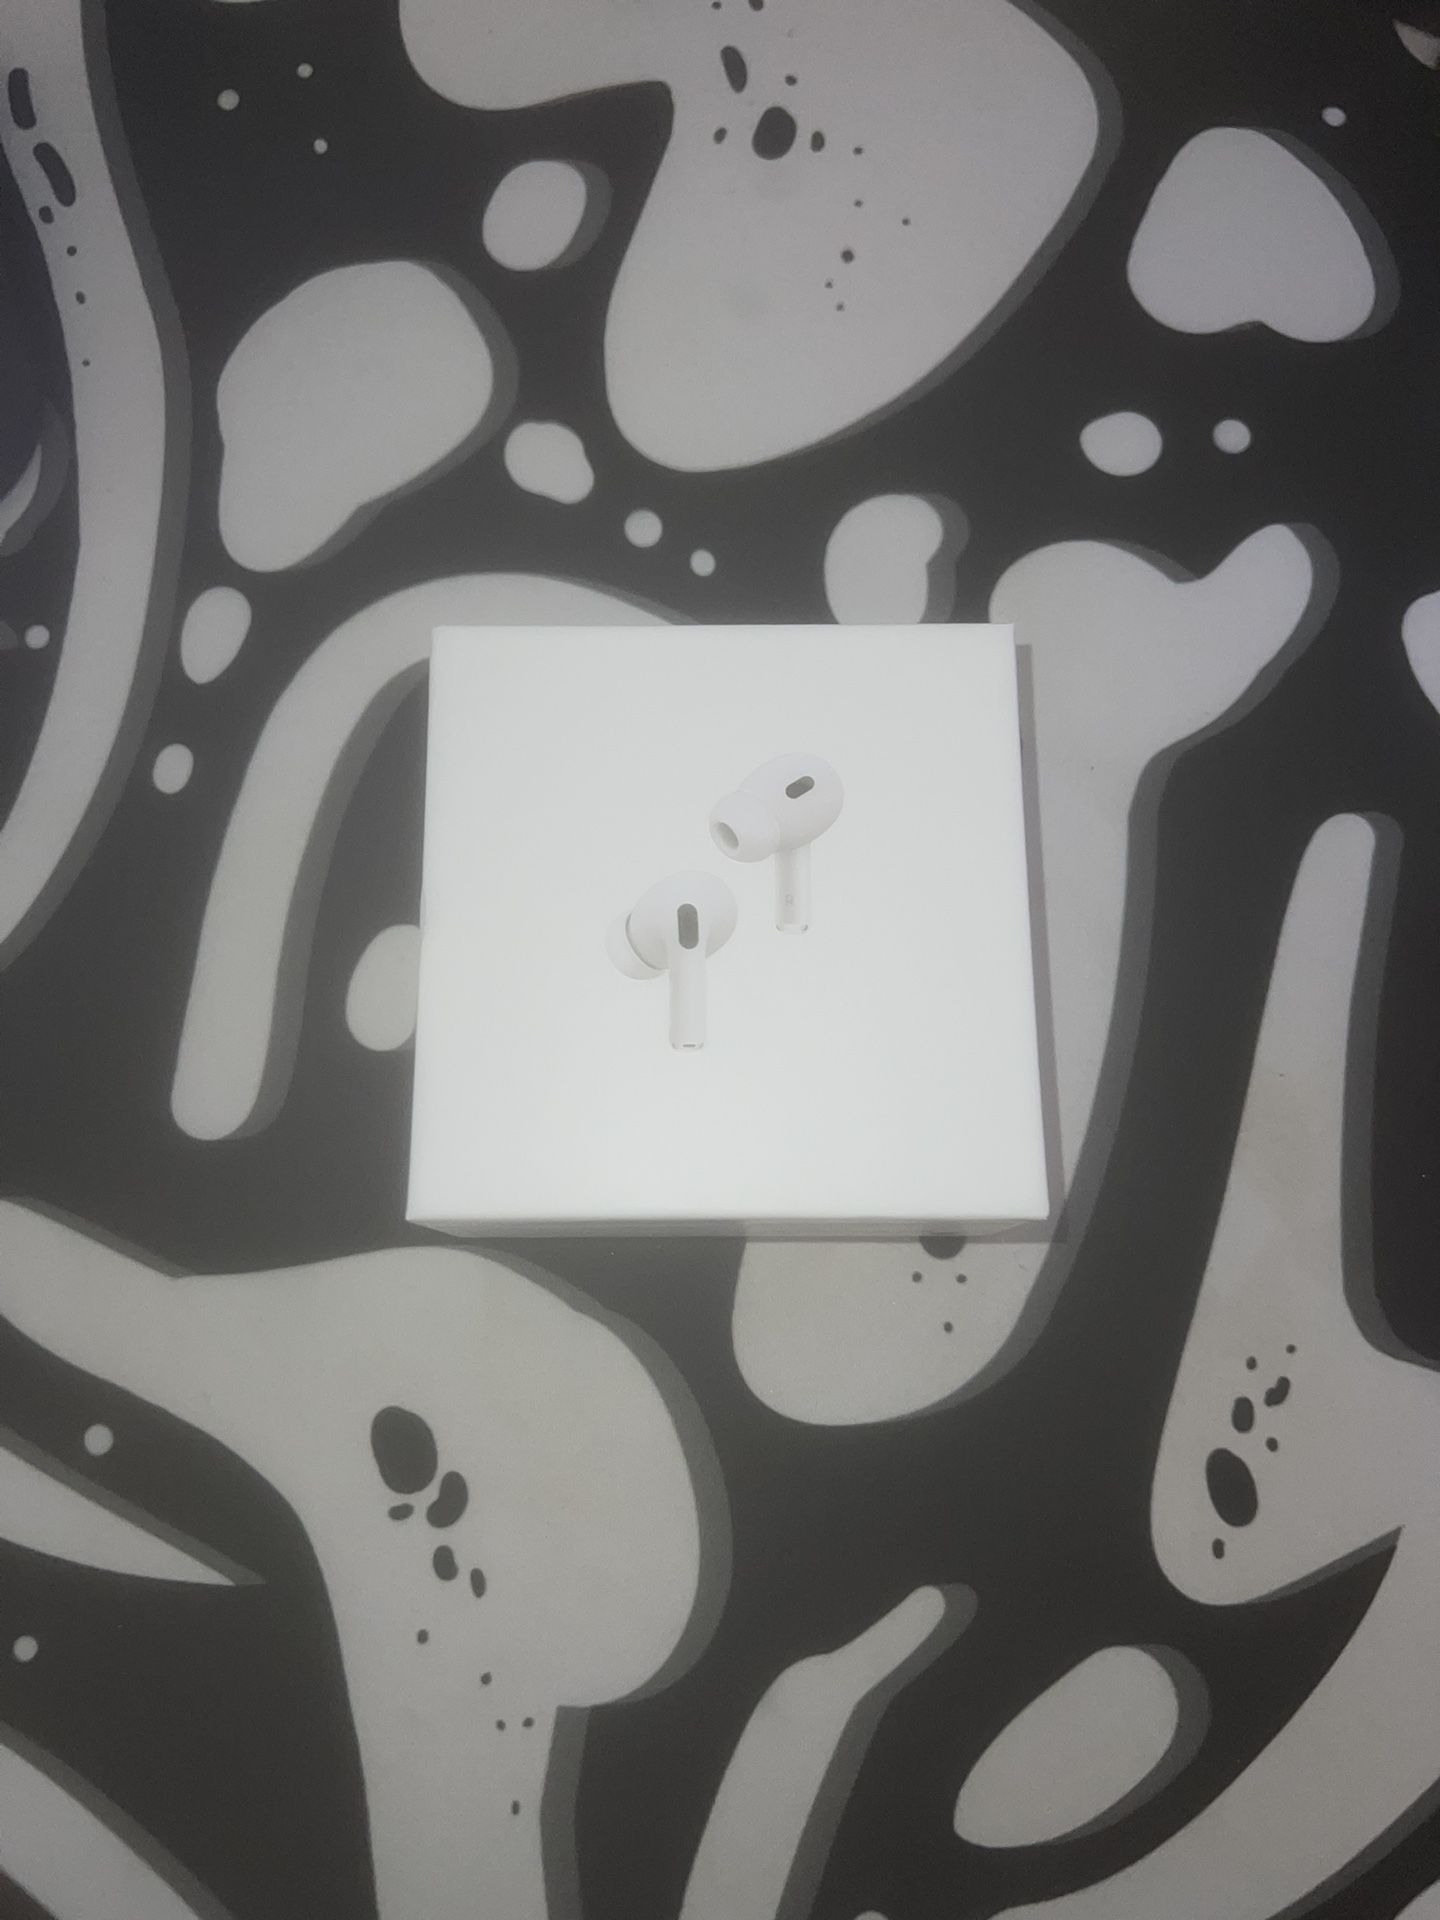 AirPods Pro (2nd Generation) *UNOPENED*